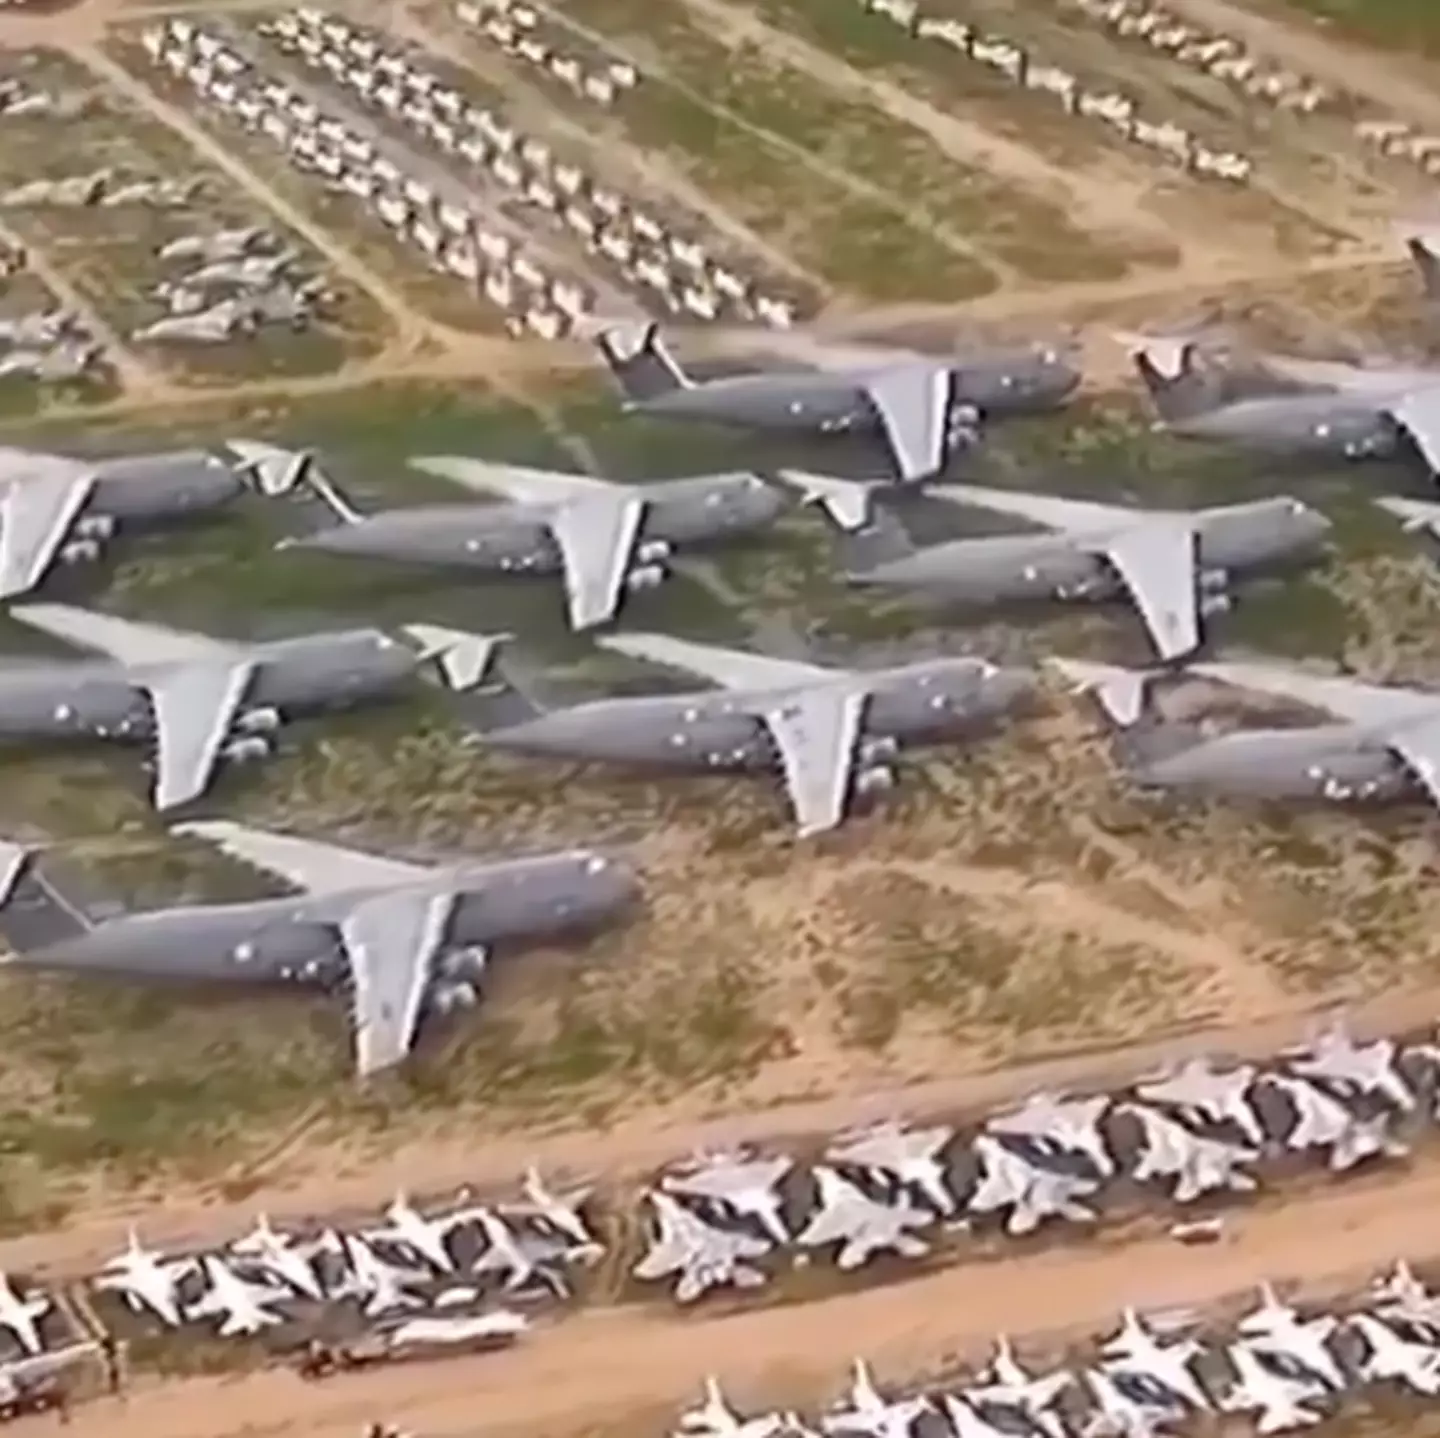 People can't understand why $34 billion worth of airplane parts are sitting in graveyard